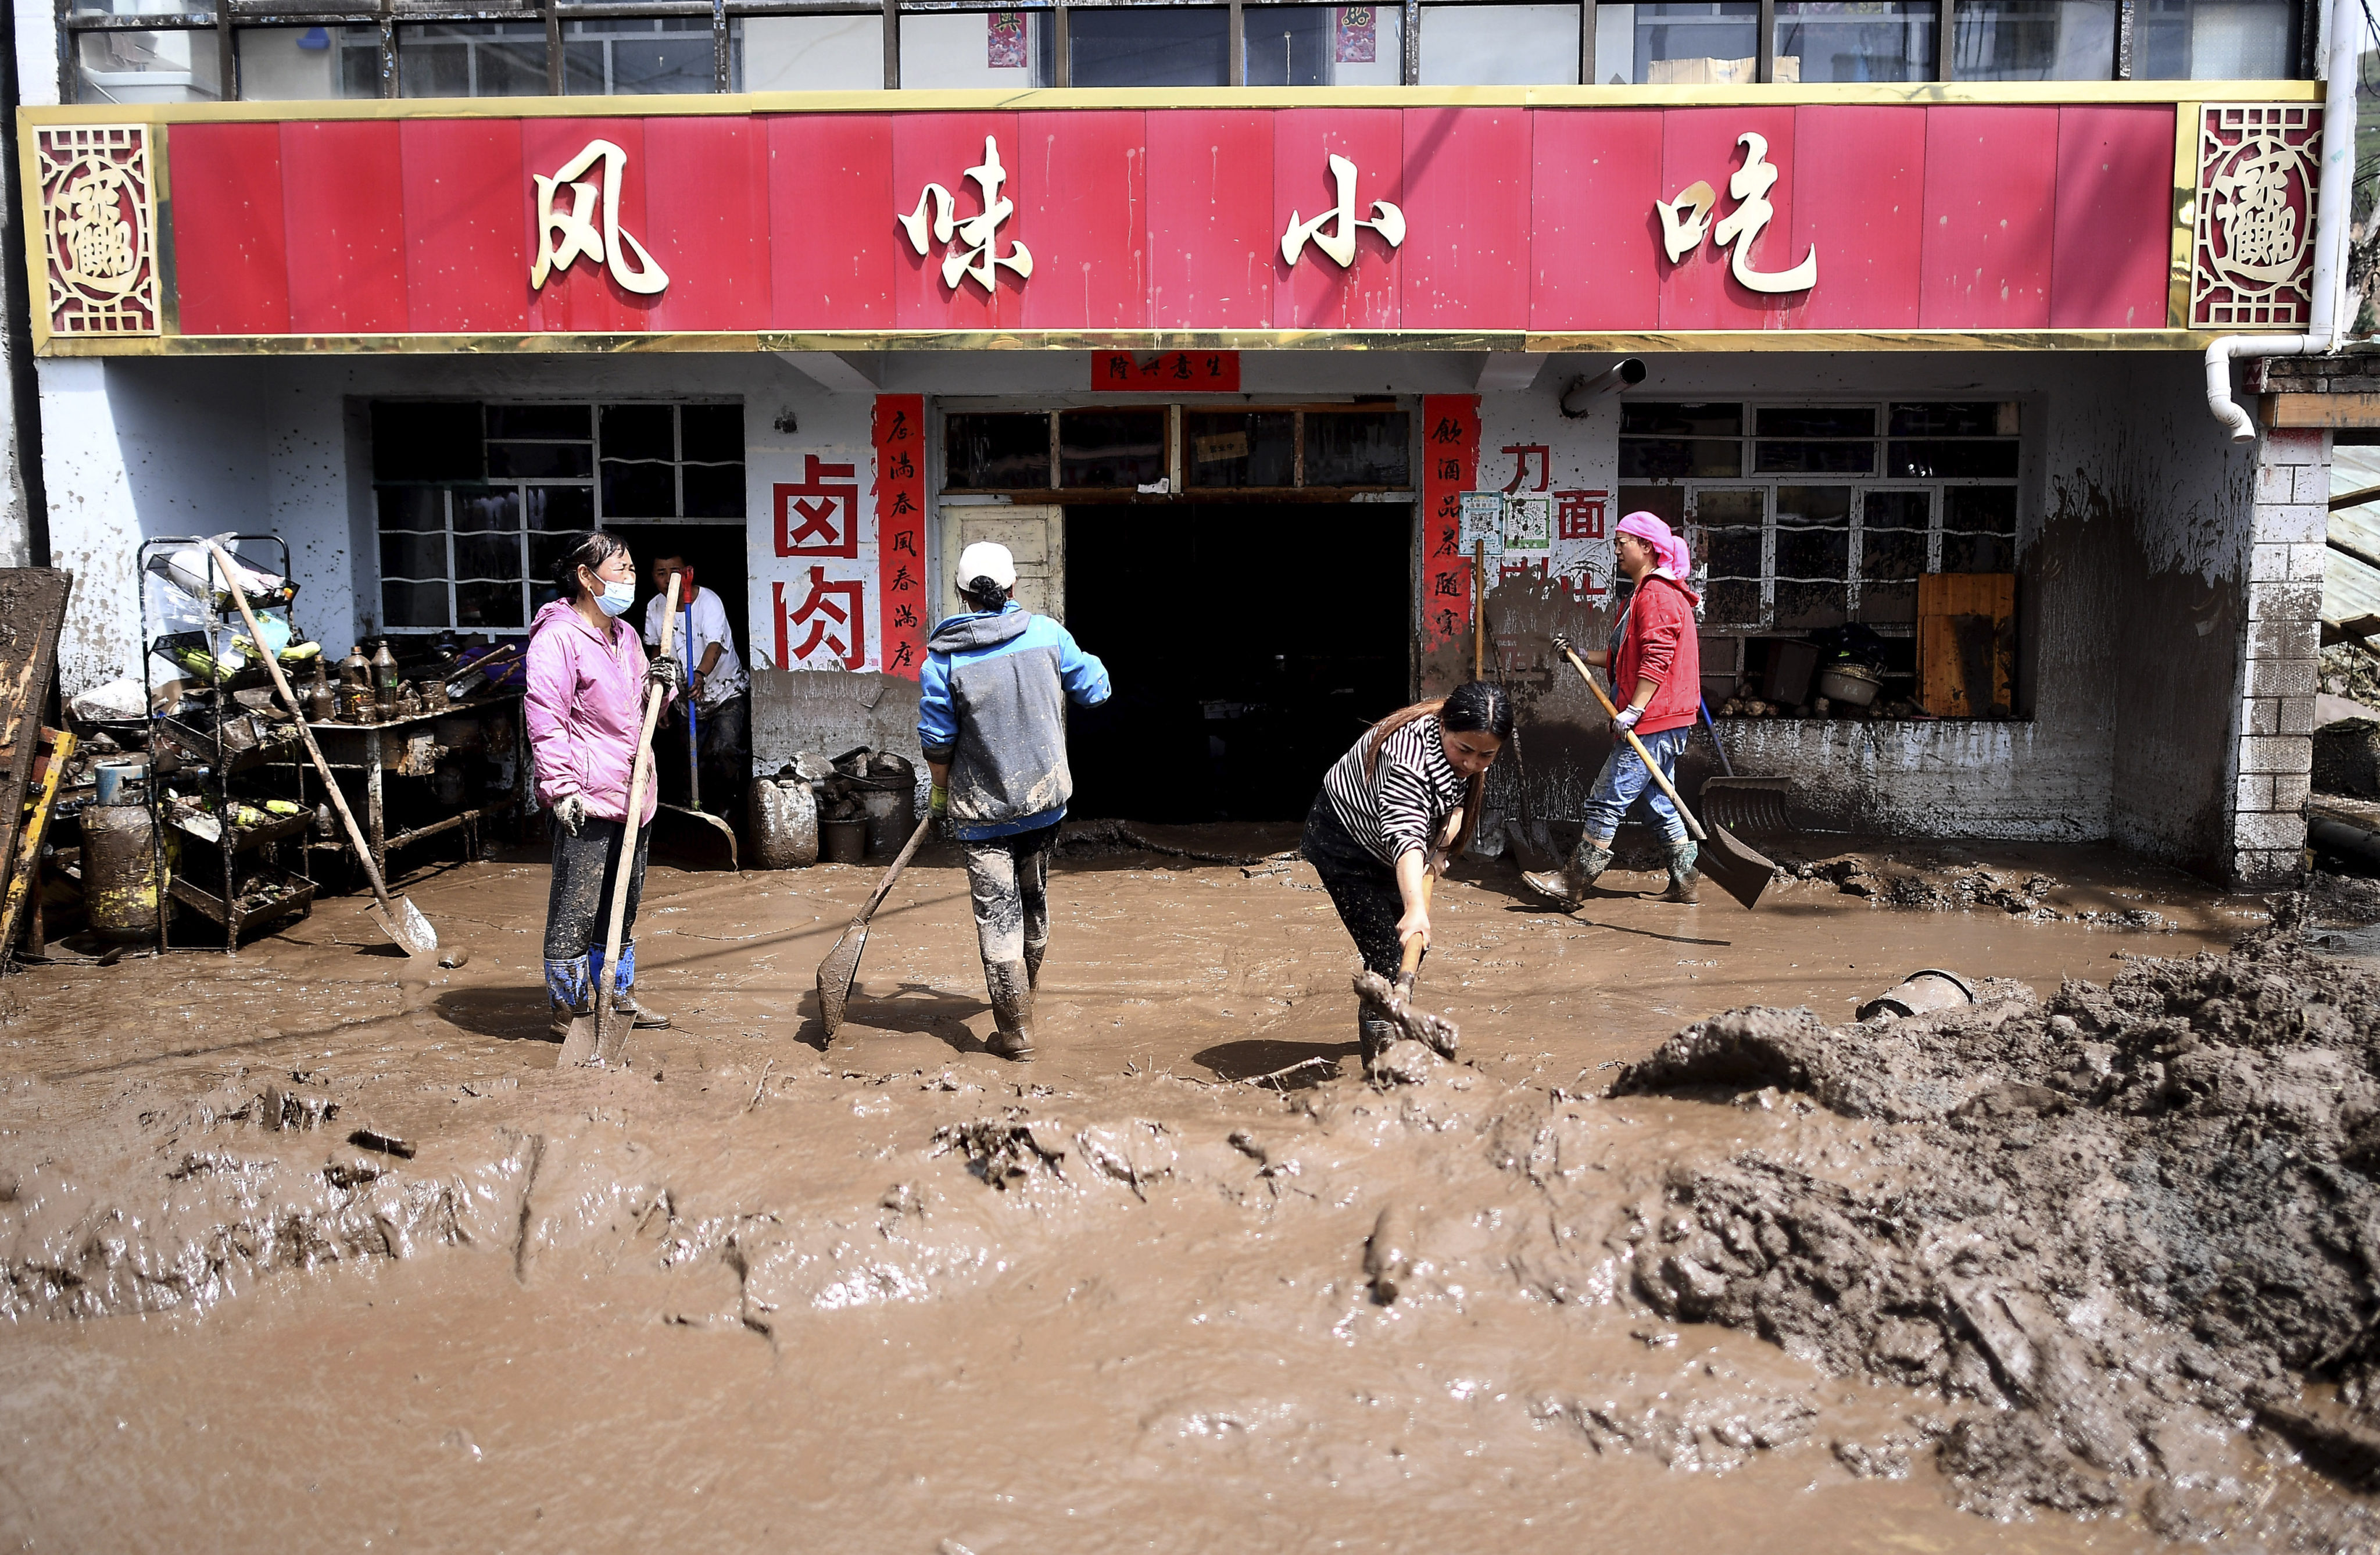 Heavy rain started in Datong county in Qinghai province in northwestern China on Wednesday and by Thursday at least 16 people were reported dead and dozens were missing. Photo: Xinhua via AP